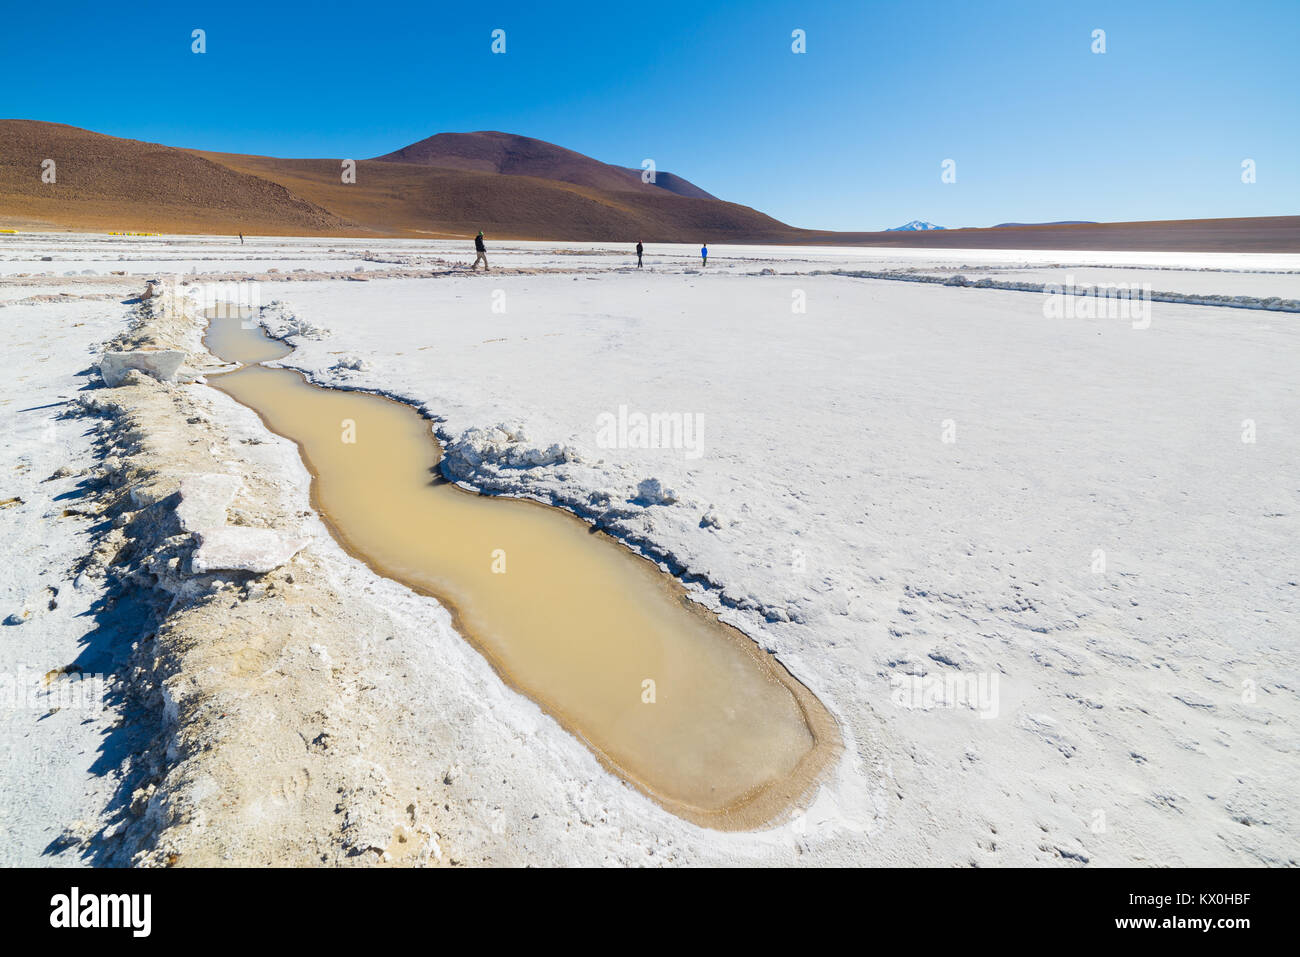 Salt lake on the Andes, road trip to the famous Uyuni Salt Flat, among the most important travel destination in Bolivia, South America. Stock Photo